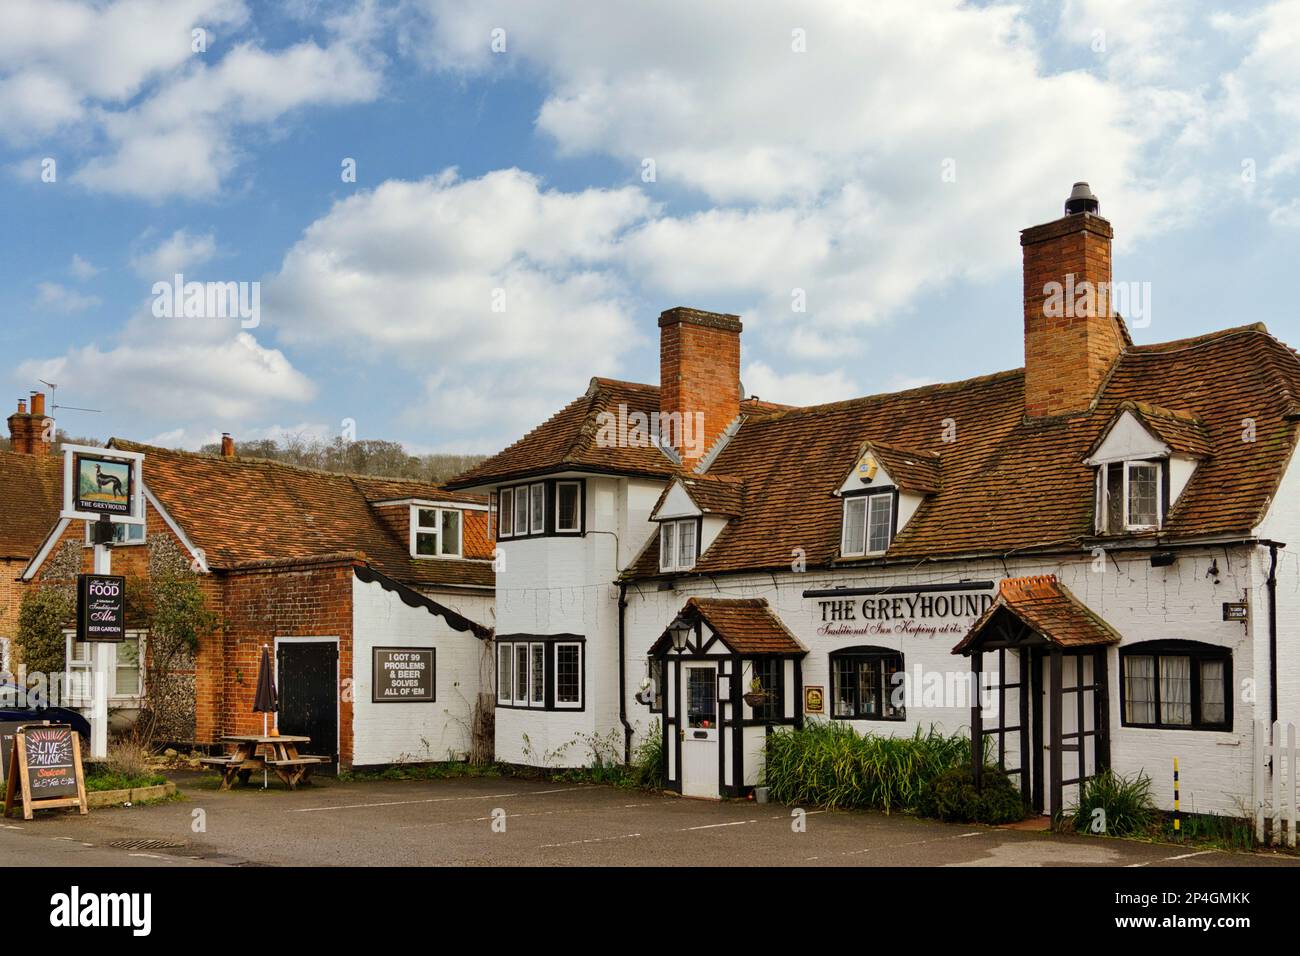 The Greyhound, Whitchurch-on-Thames, Oxfordshire, Royaume-Uni Banque D'Images